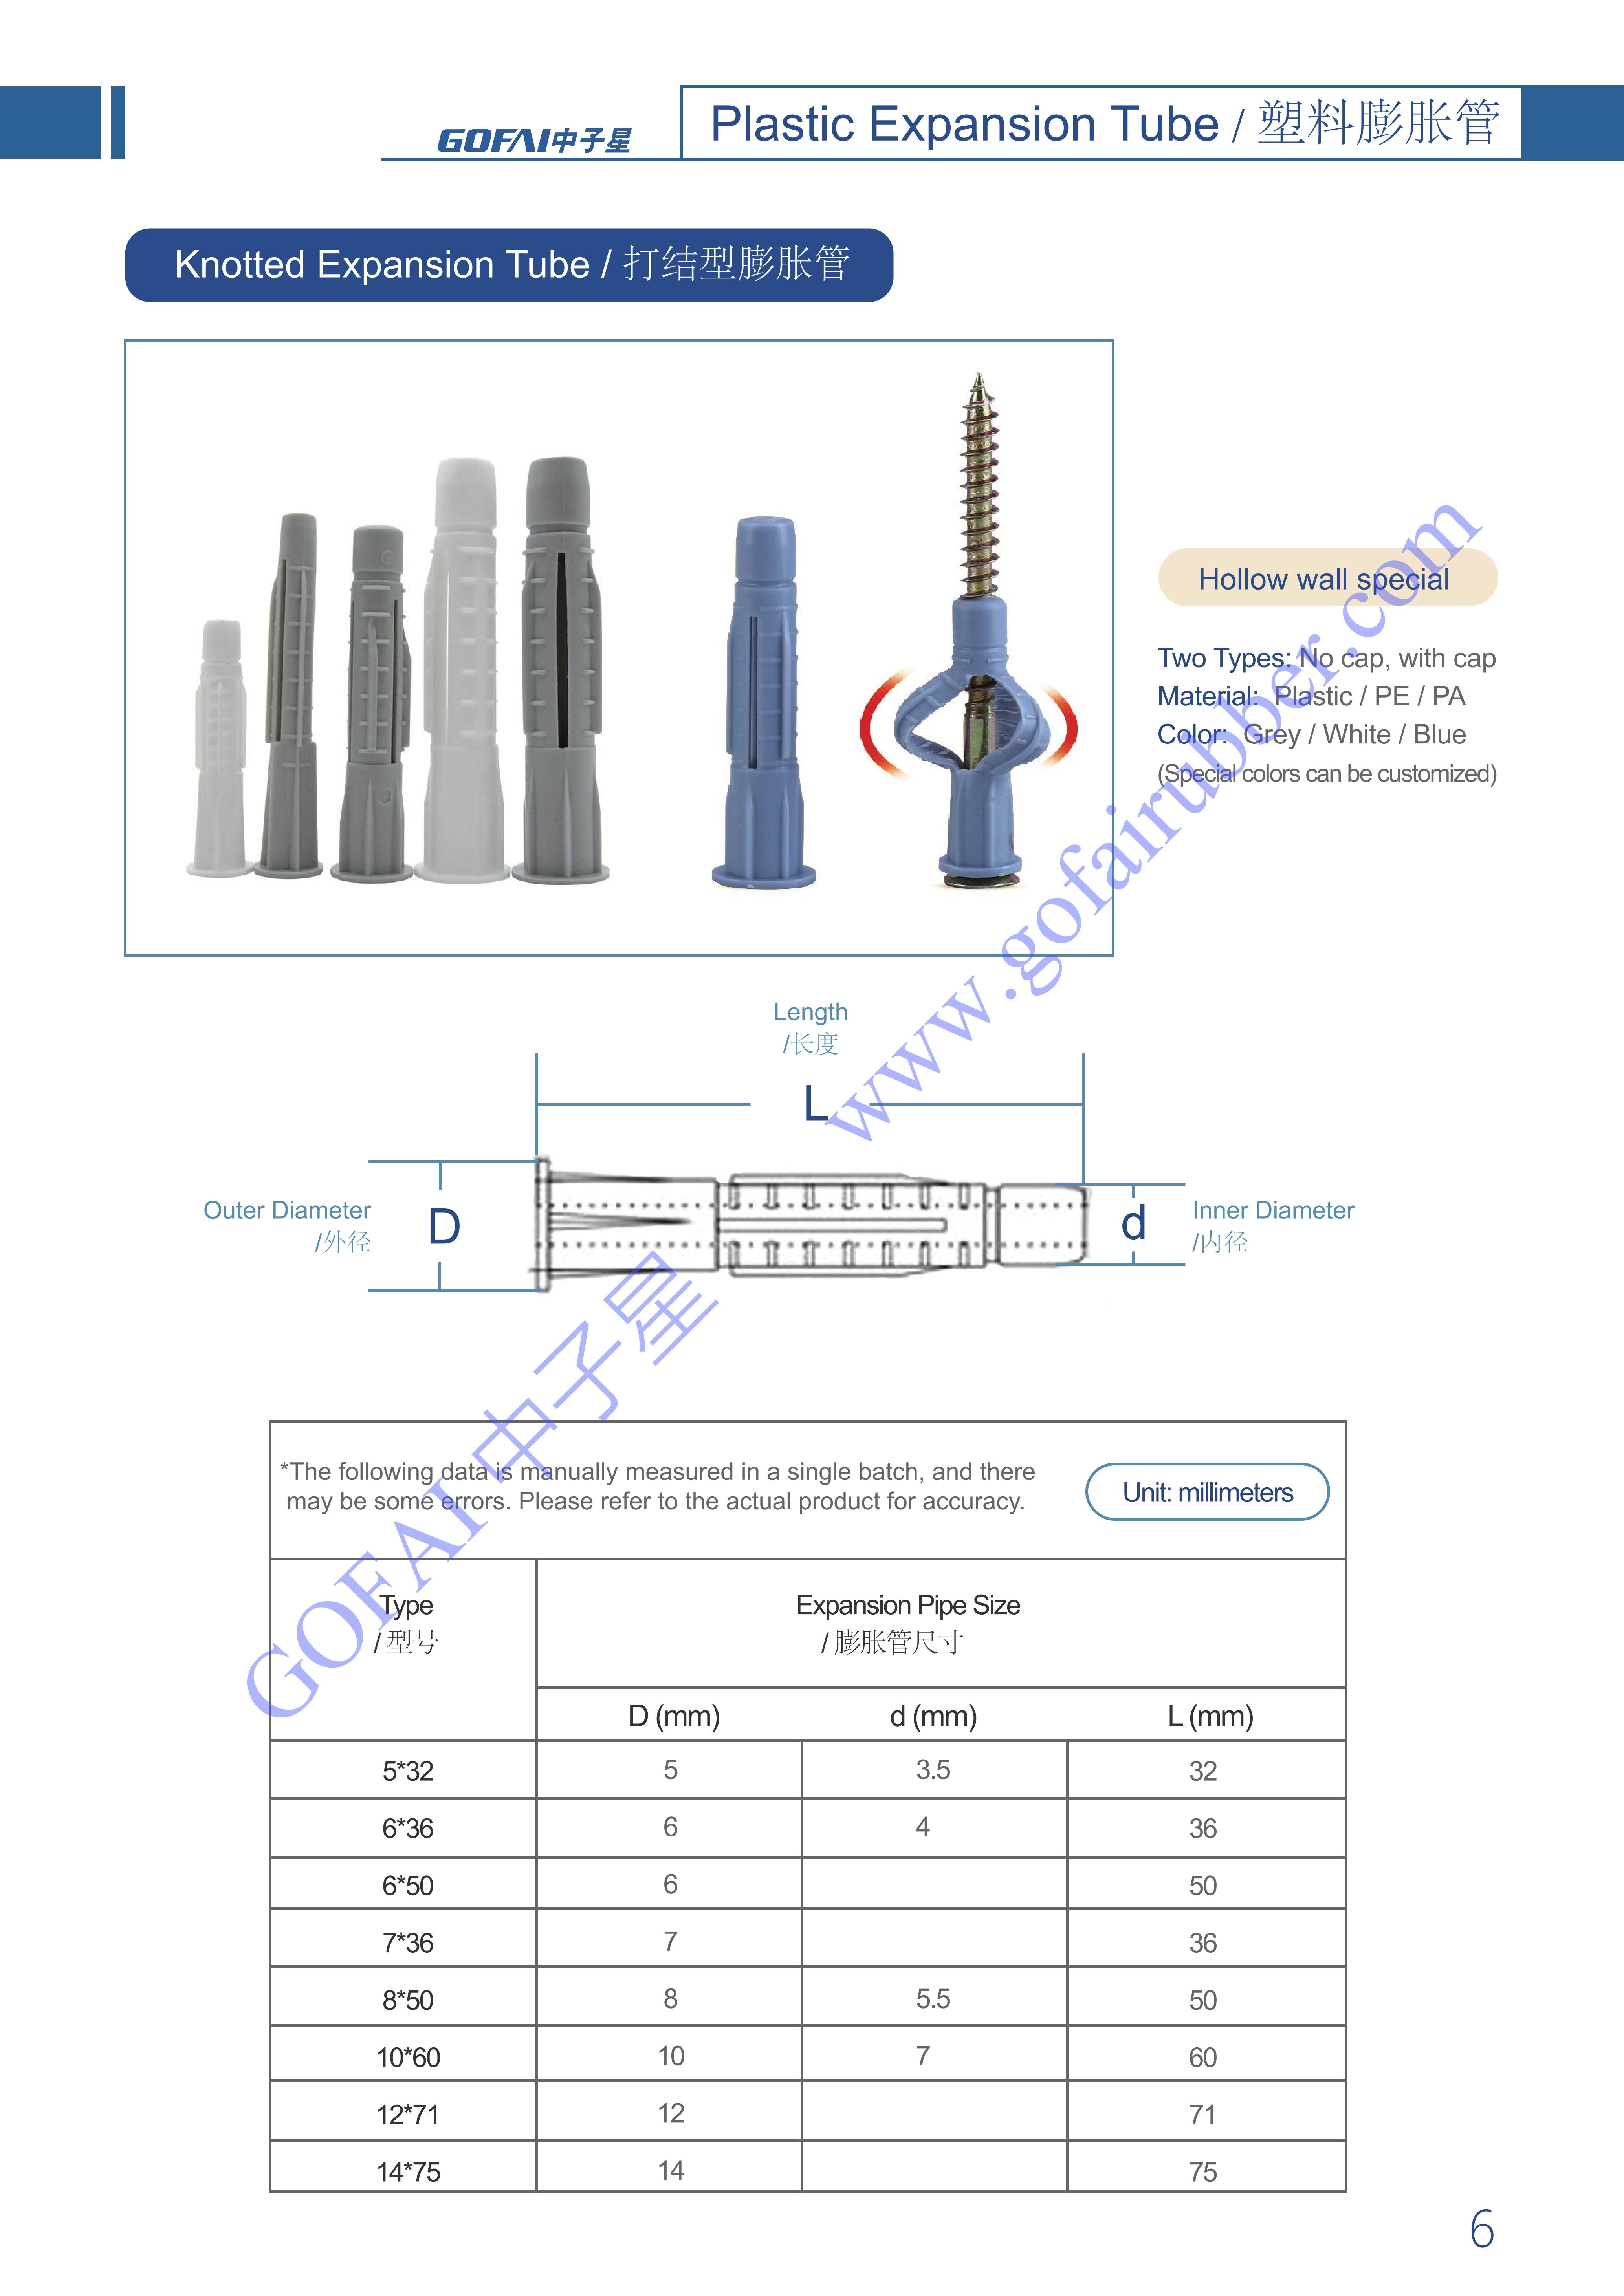 GOFAI Plastic Expansion Tube Series Products Brochure_7.jpg